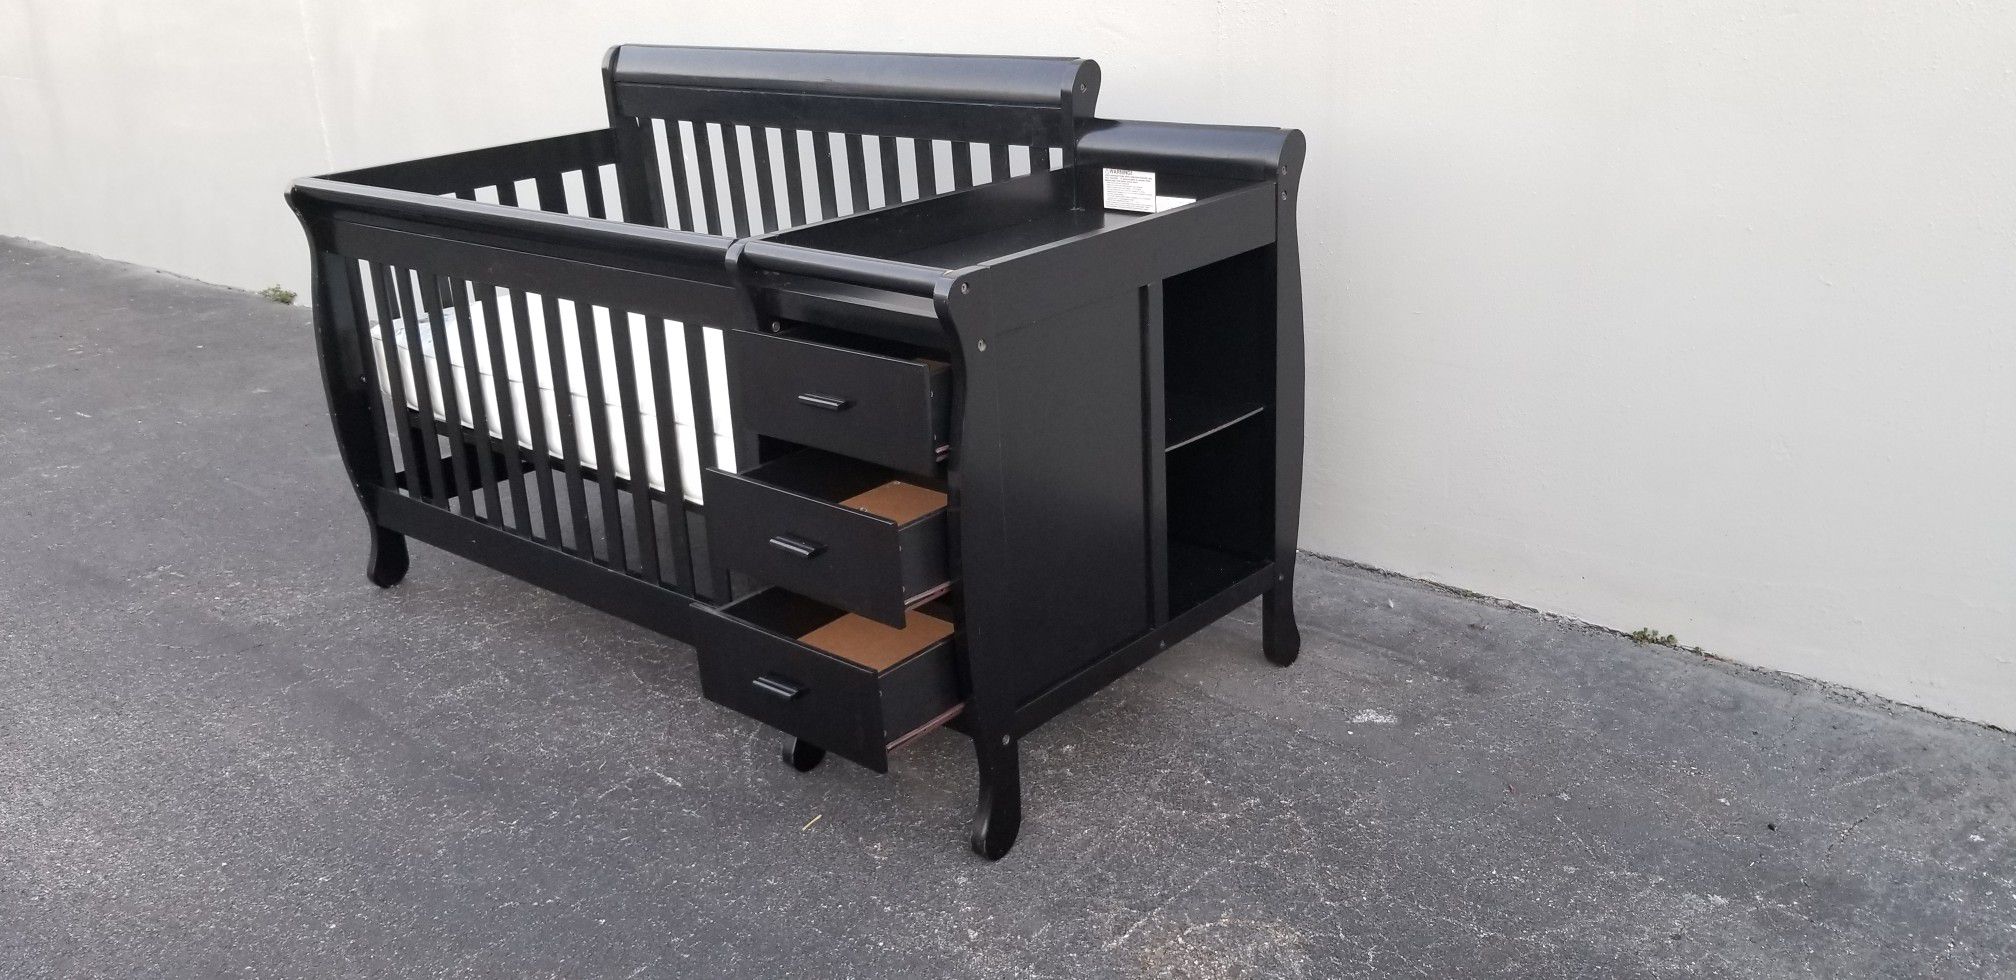 4 IN 1 BABY CRIB CONVERTIBLE WITH 3 DRAWERS AND SHELF ON THE SIDE WITH MATTRESS INCLUDED